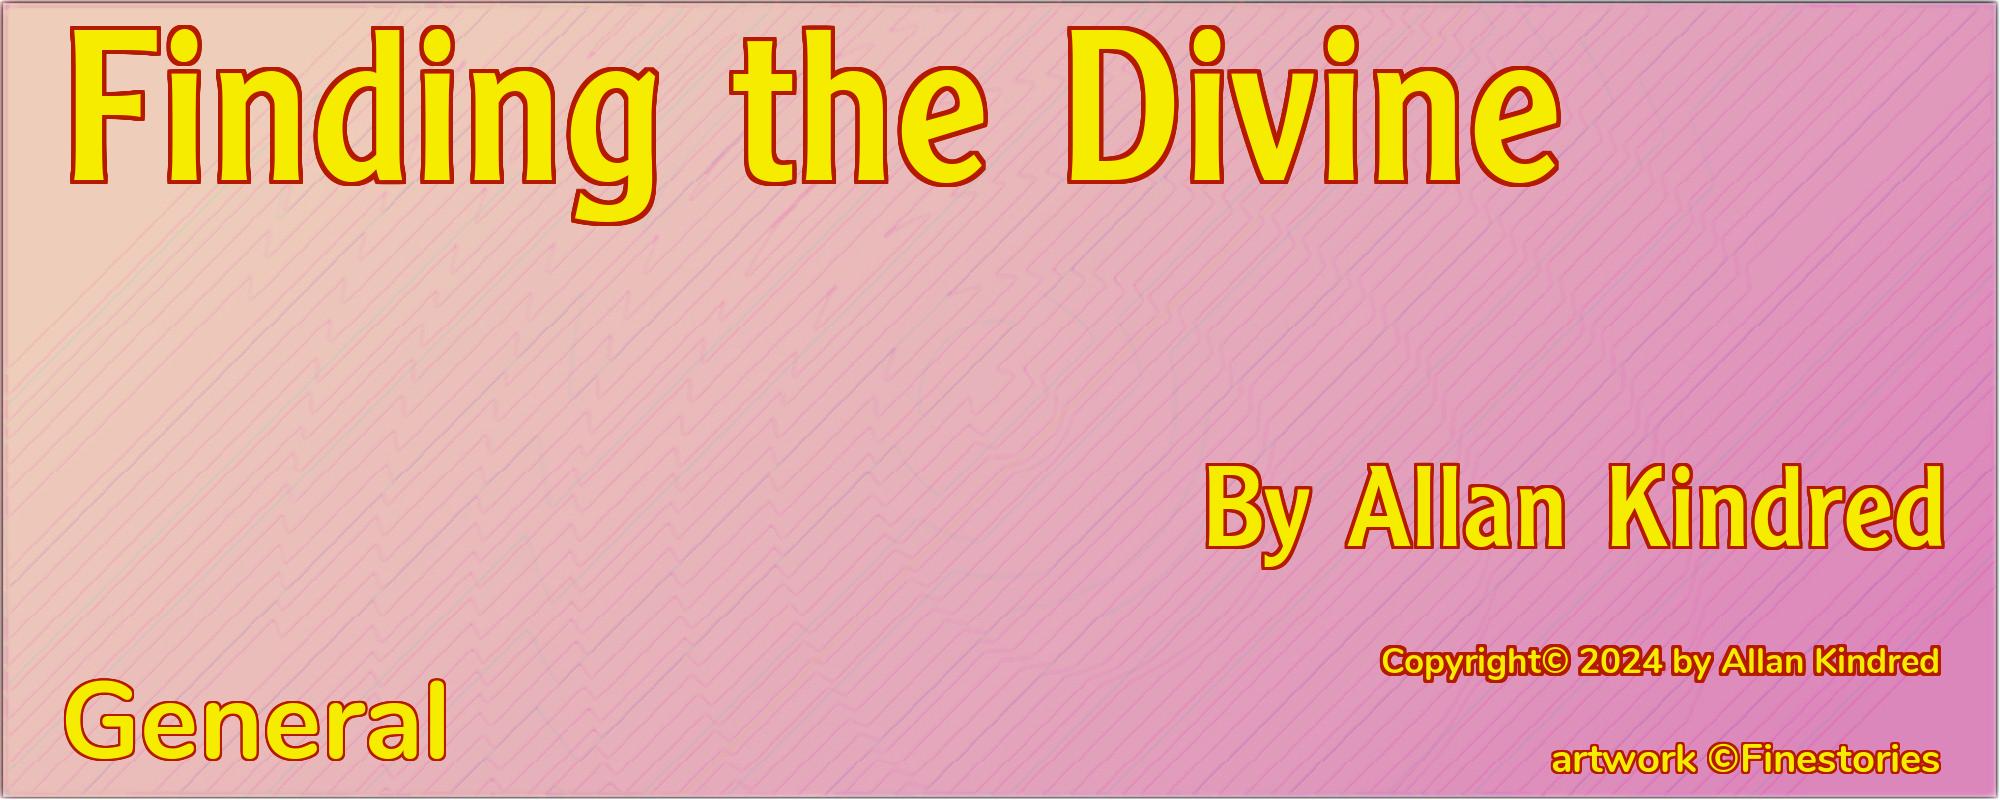 Finding the Divine - Cover